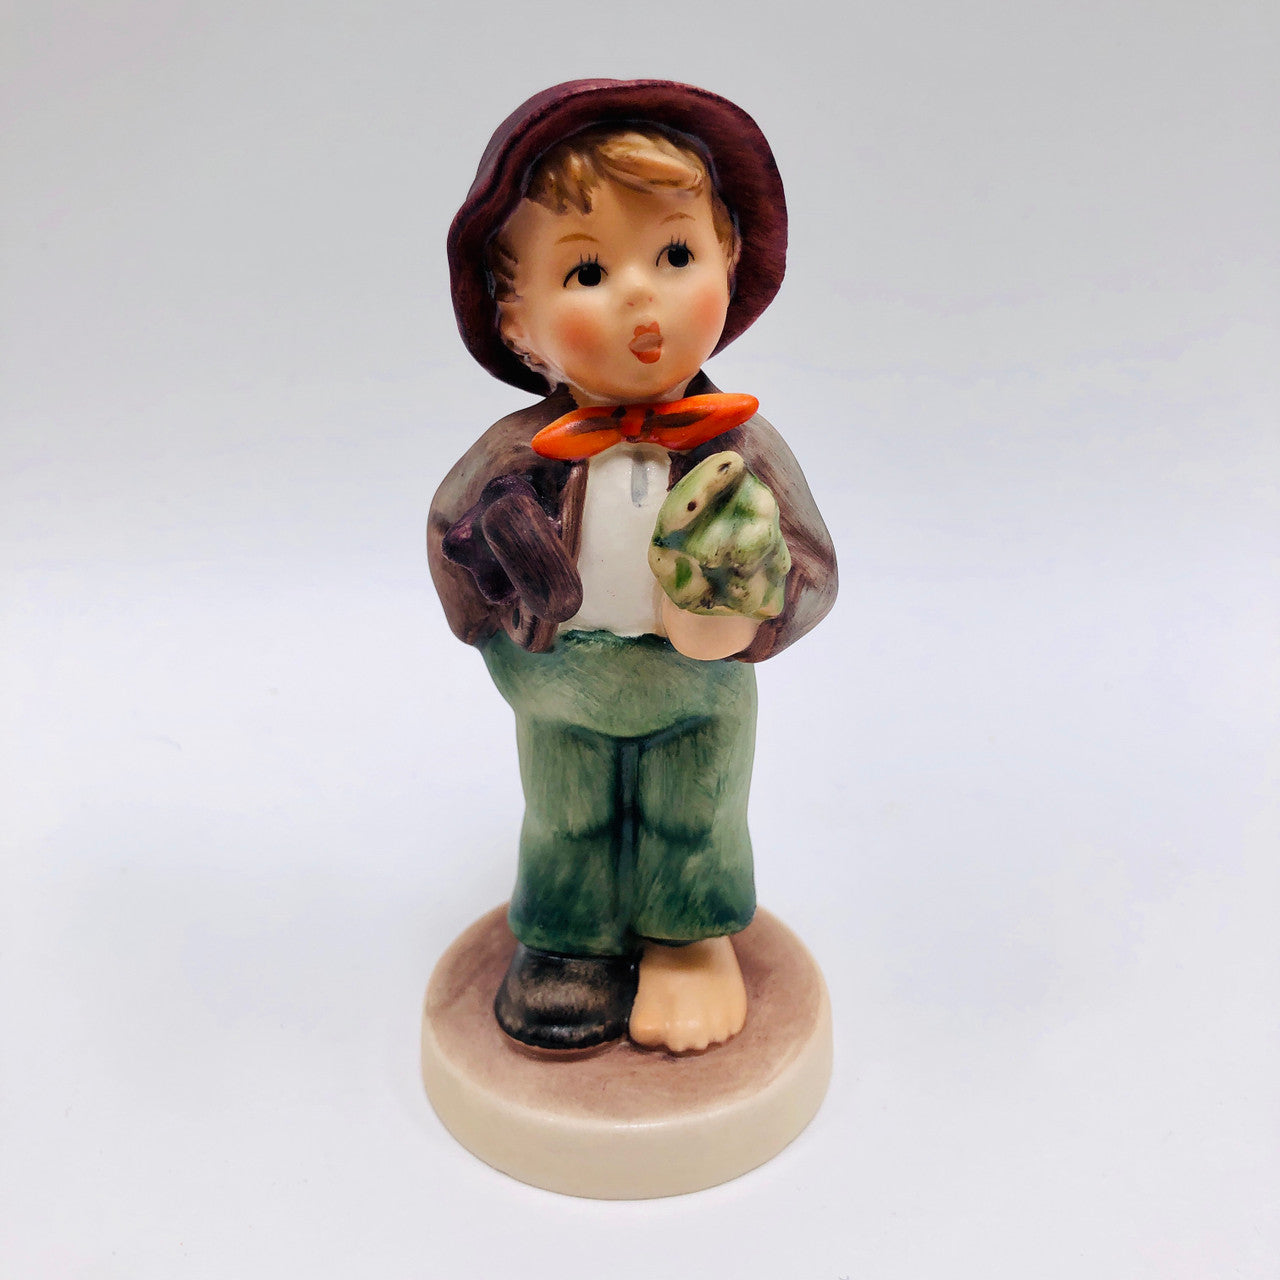 The Religious History of Hummel Figurines - Antique Trader